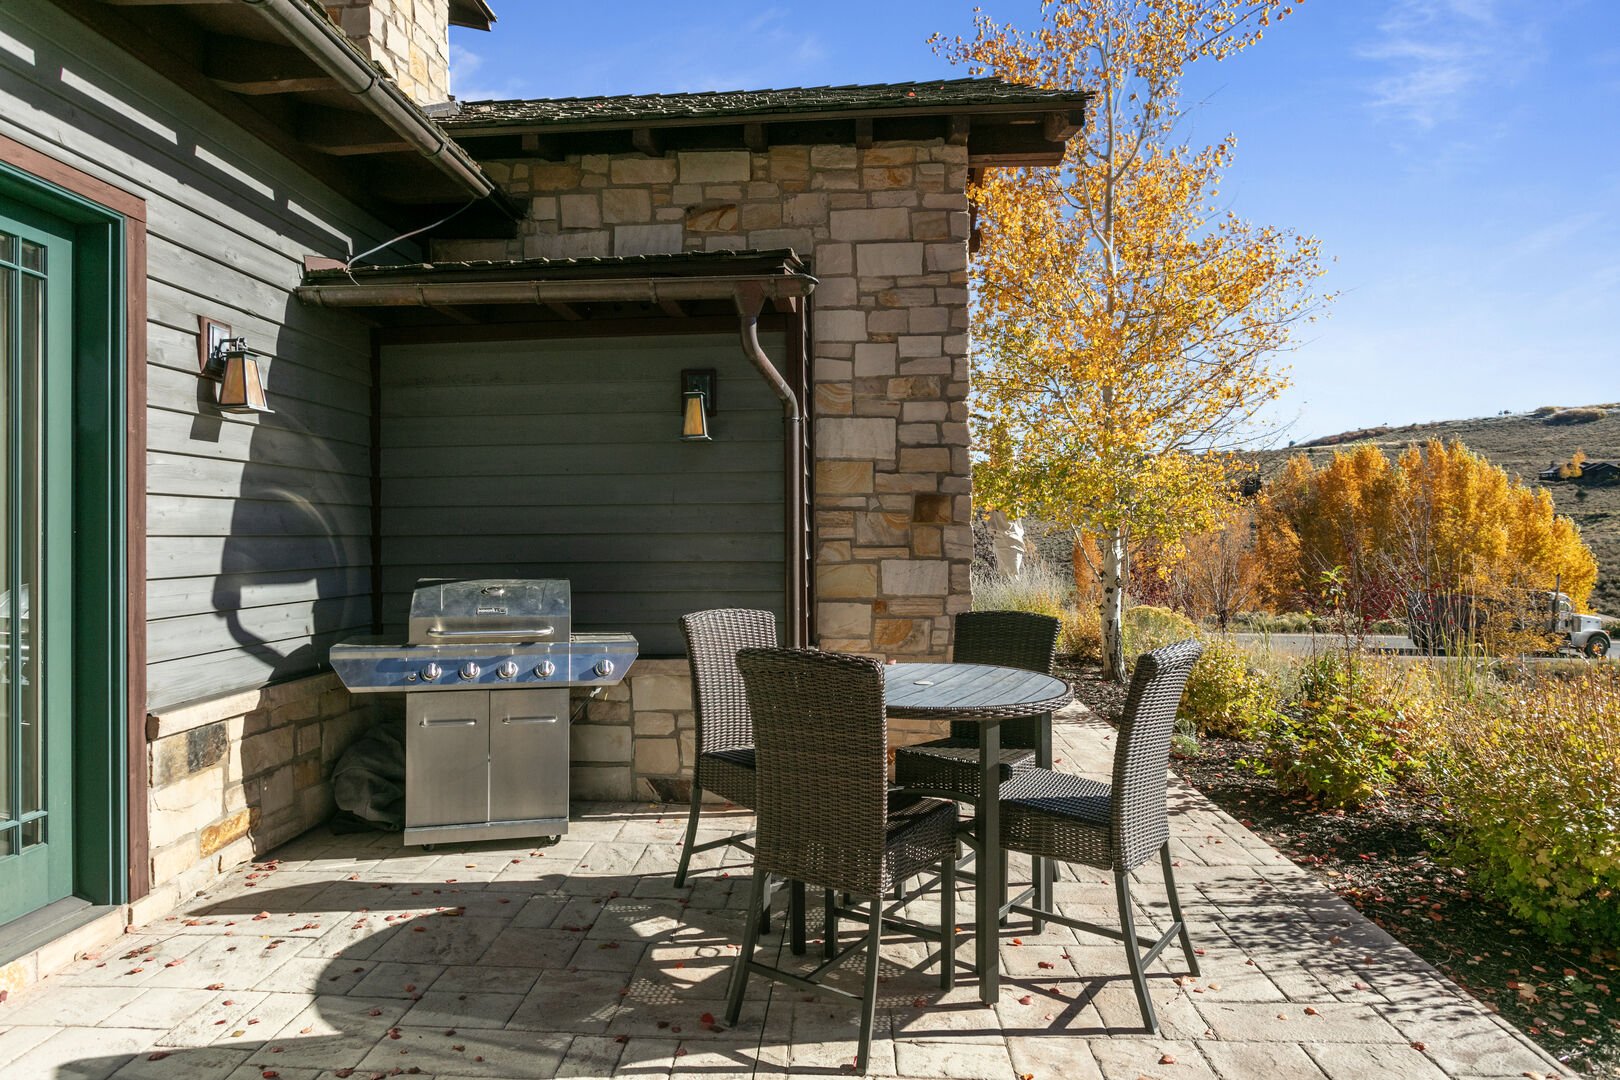 Outdoor dining for up to four and BBQ grill.